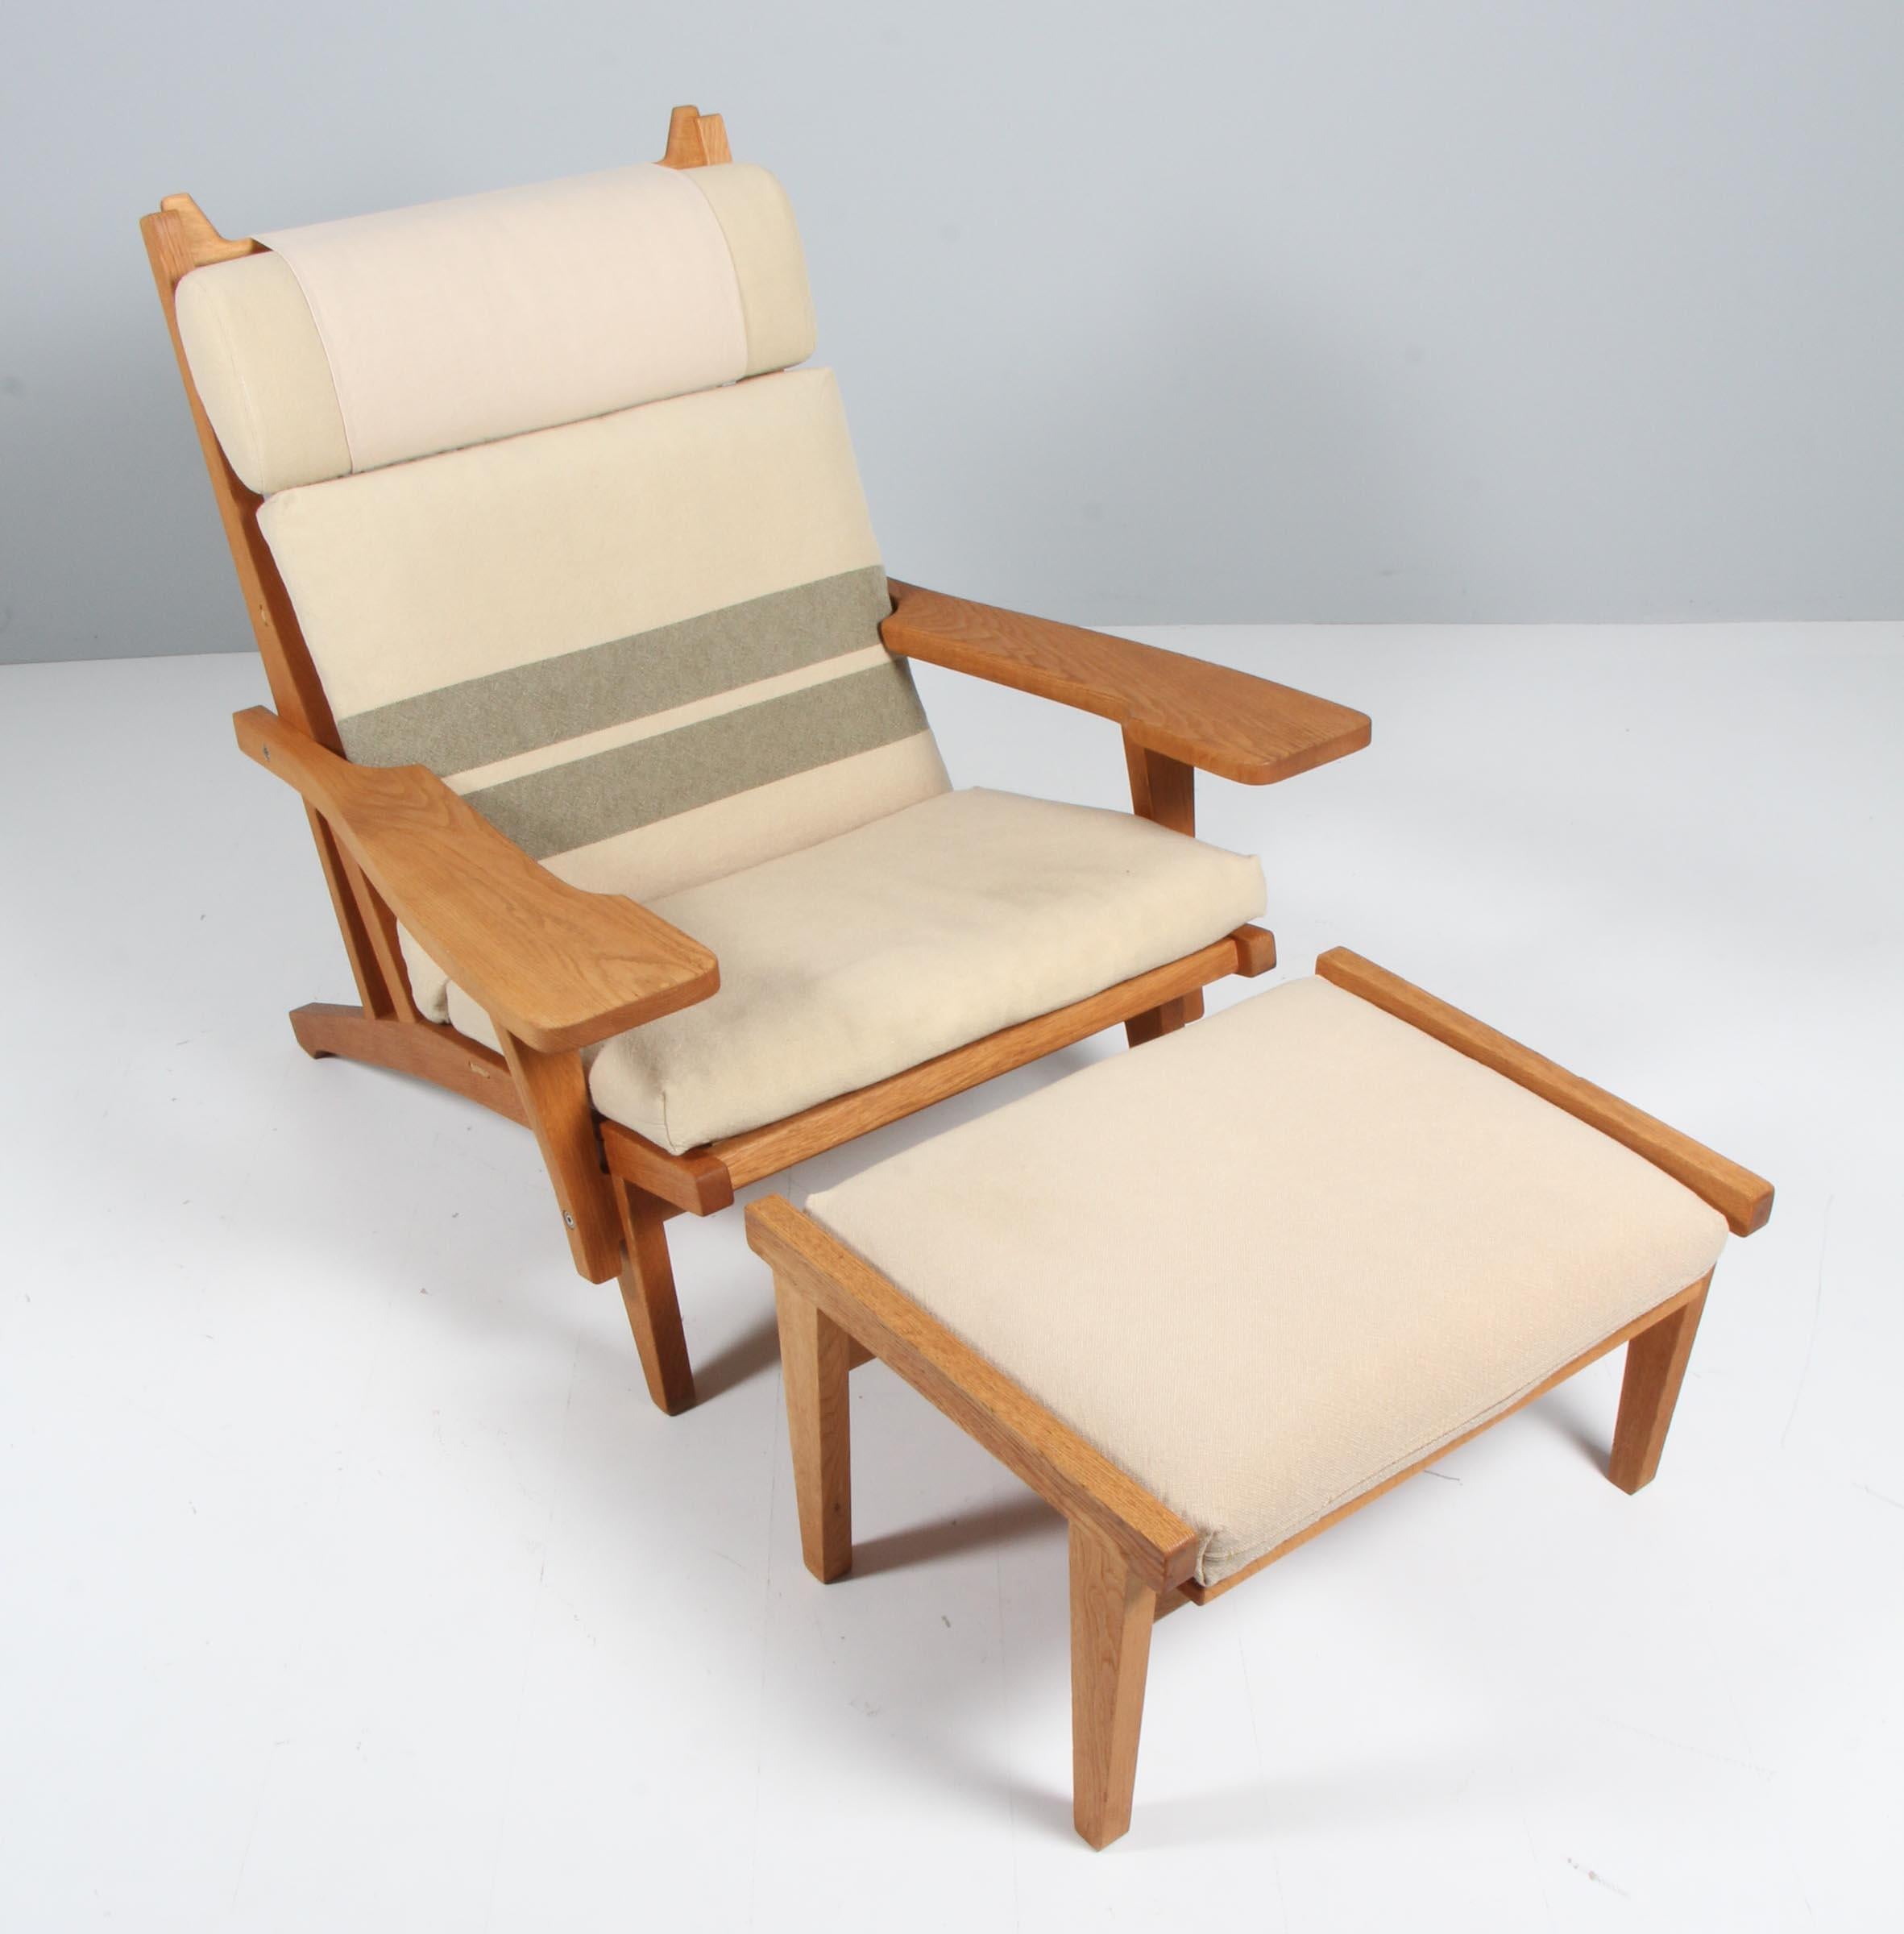 Hans J. Wegner lounge chair with ottoman with loose cushions original upholsterey.

Frame of oak. With armrests. Back with papercord, rare version.

Model GE-375, made by GETAMA.